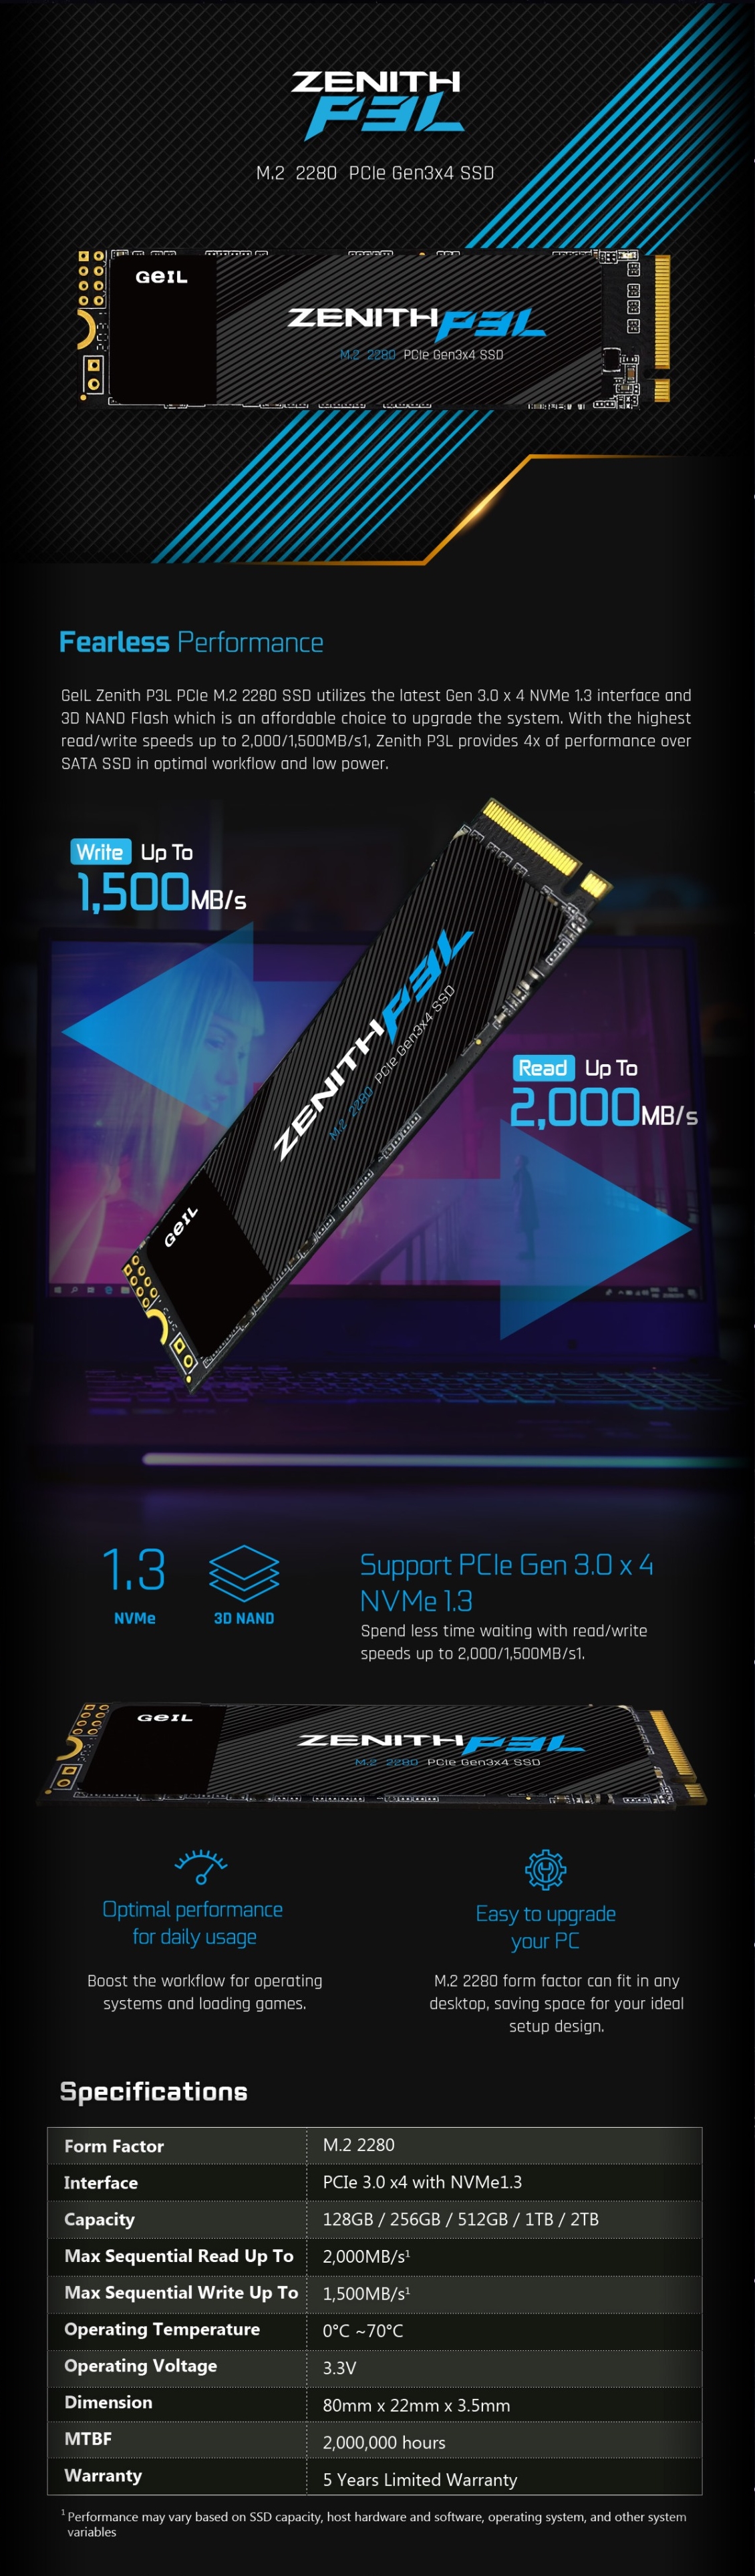 A large marketing image providing additional information about the product Geil Zenith 512GB P3L M.2 PCIe NVMe SSD - Additional alt info not provided